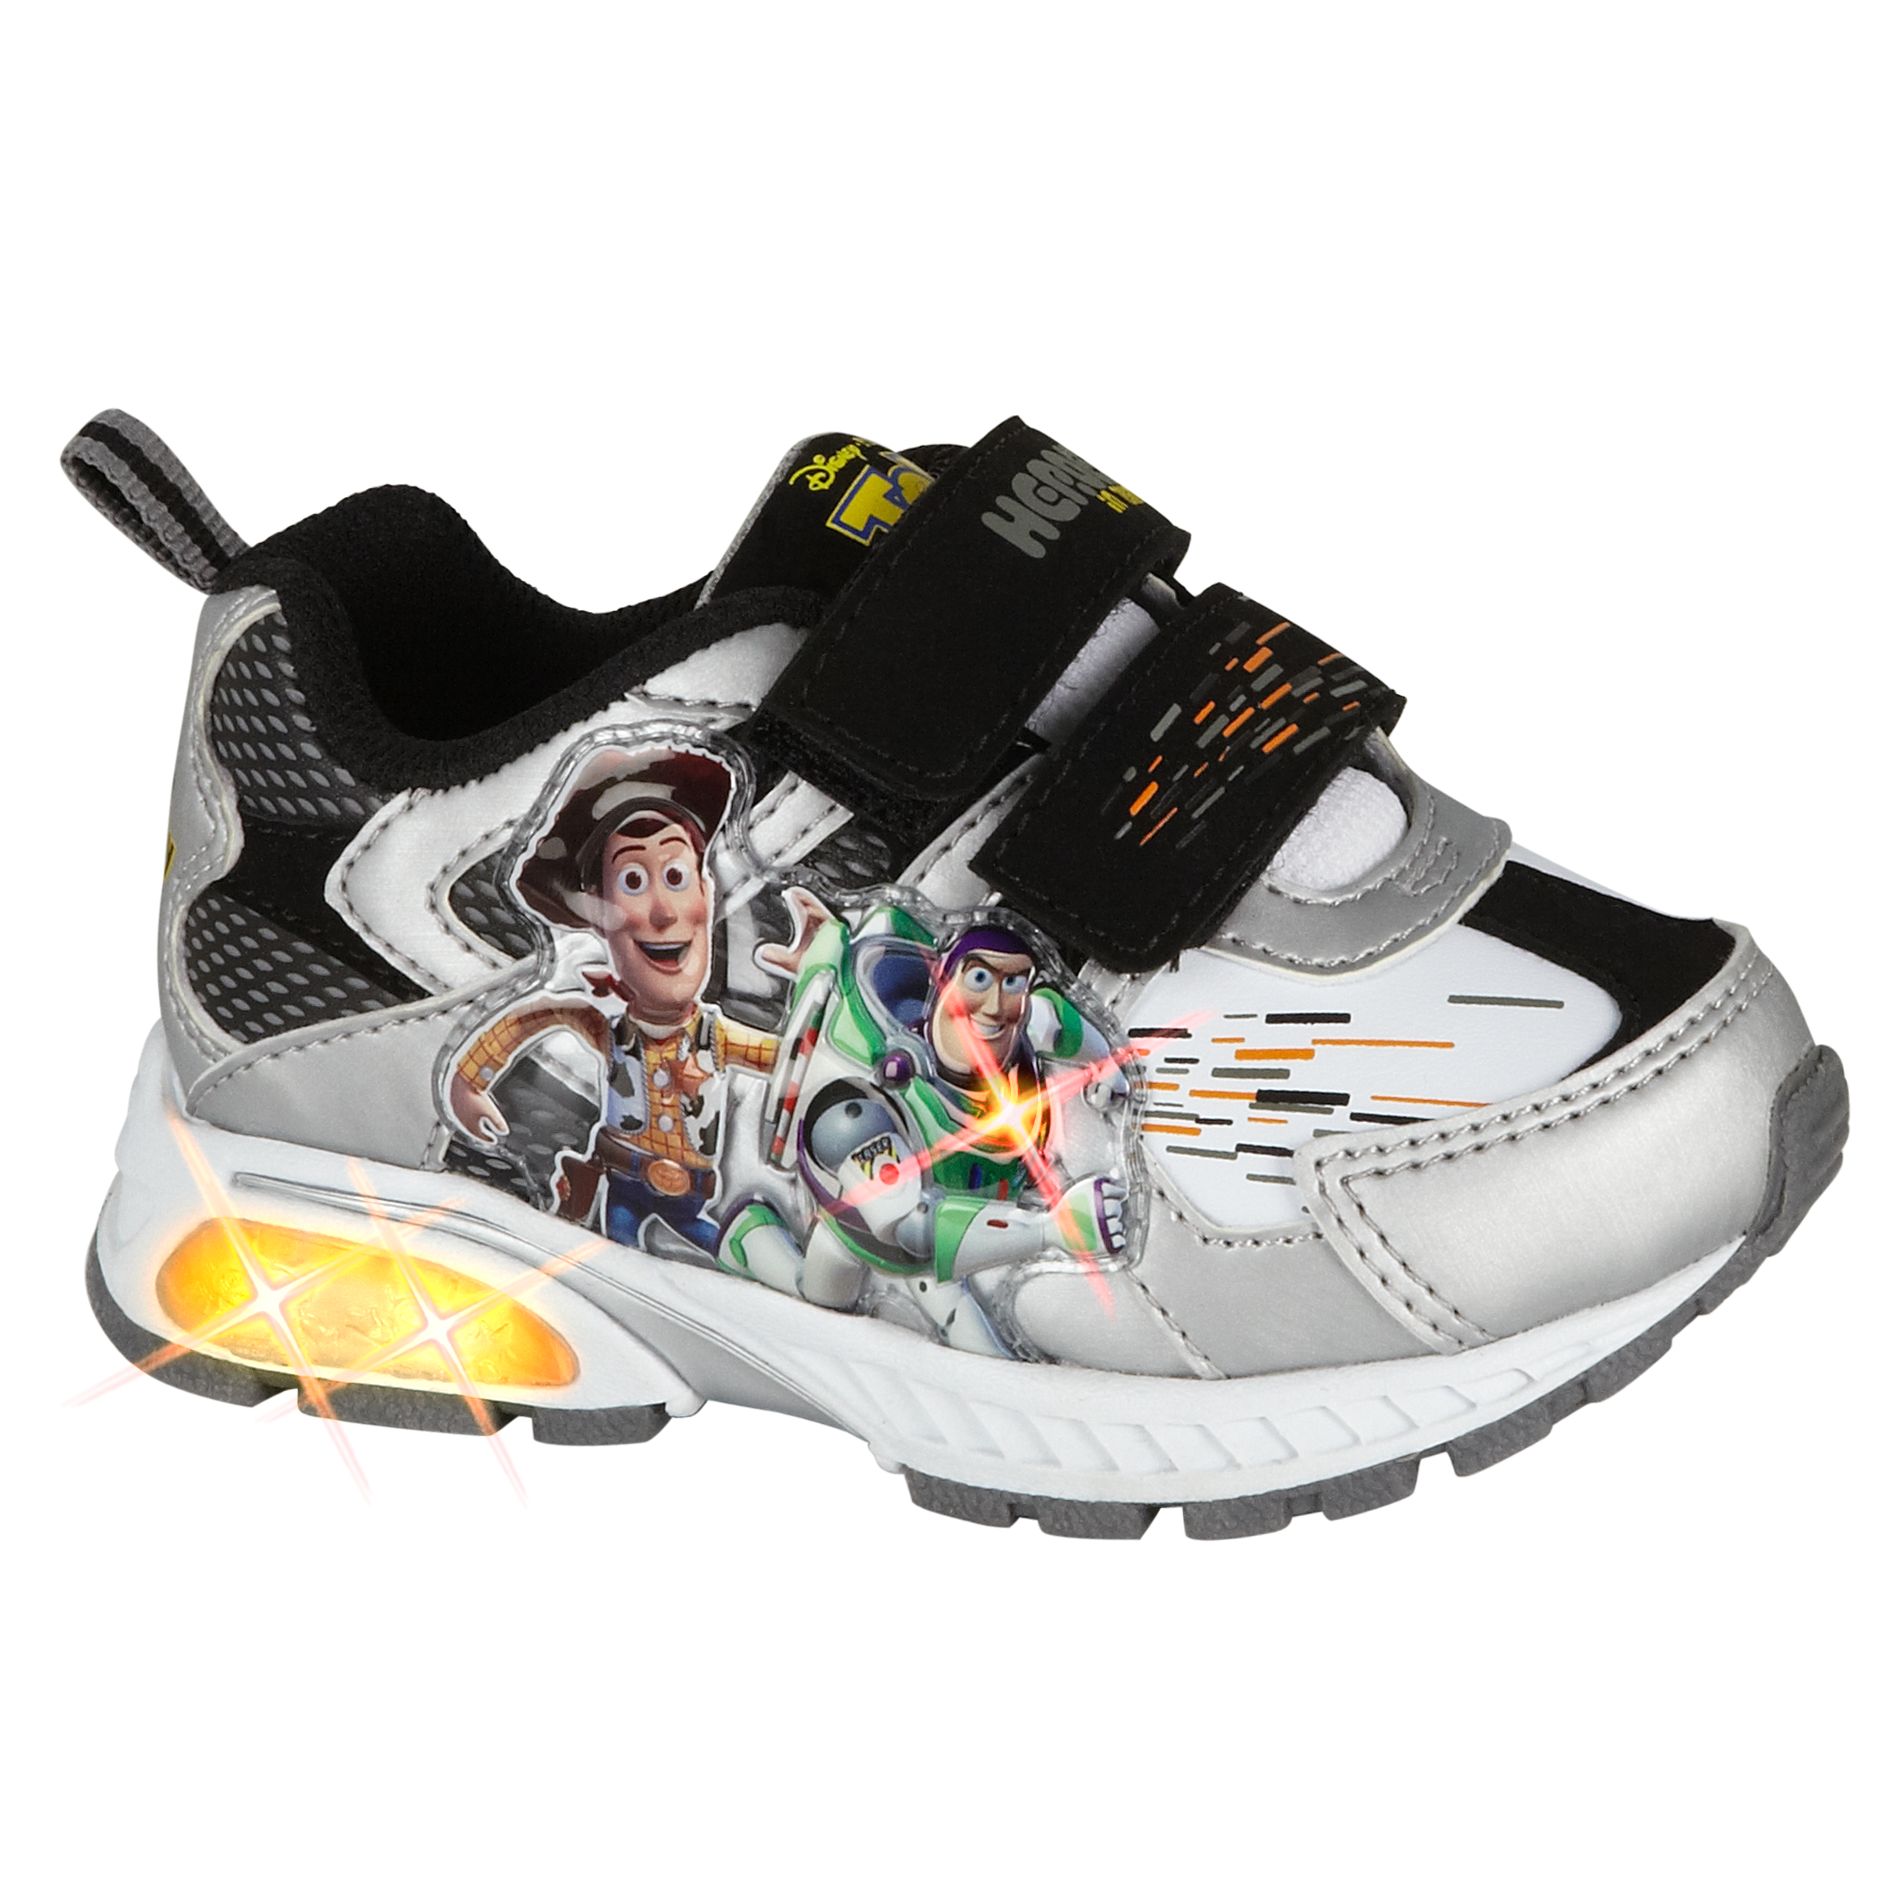 Disney Toddler Boy's Toy Story BZF 316 Lighted Athletic Shoe - Silver